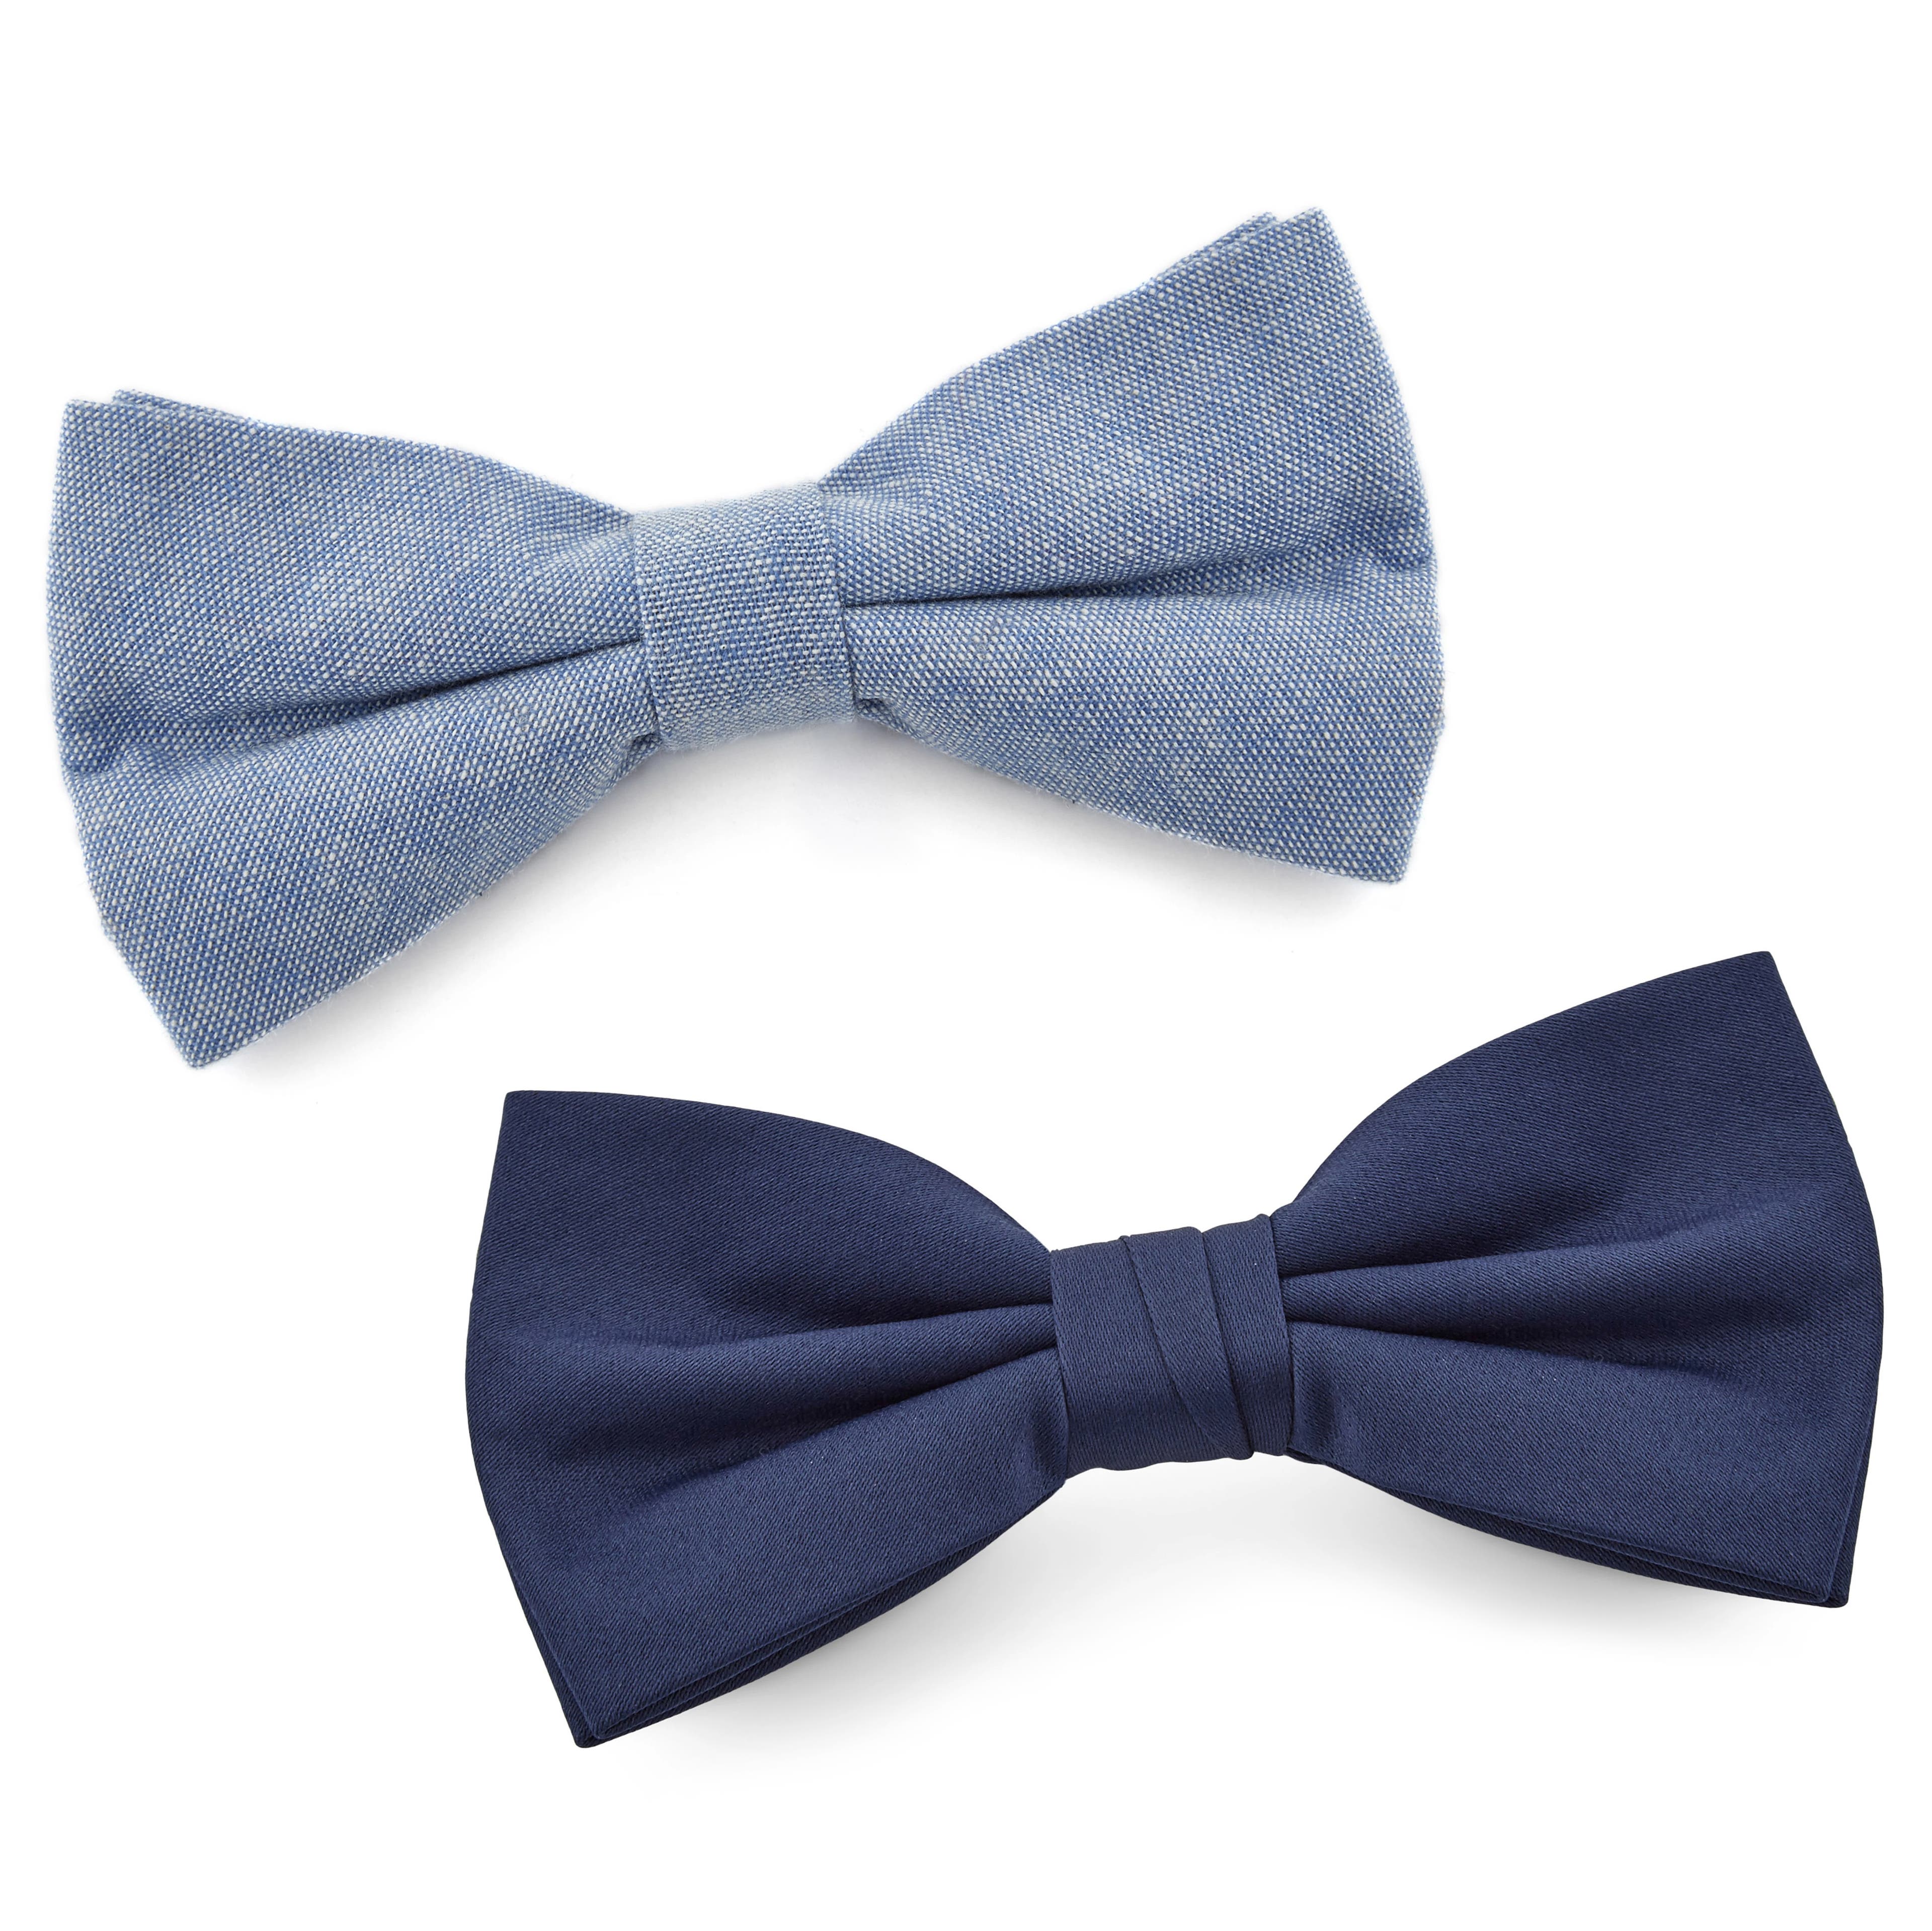 Pale Blue and Navy Pre-Tied Bow Tie Set